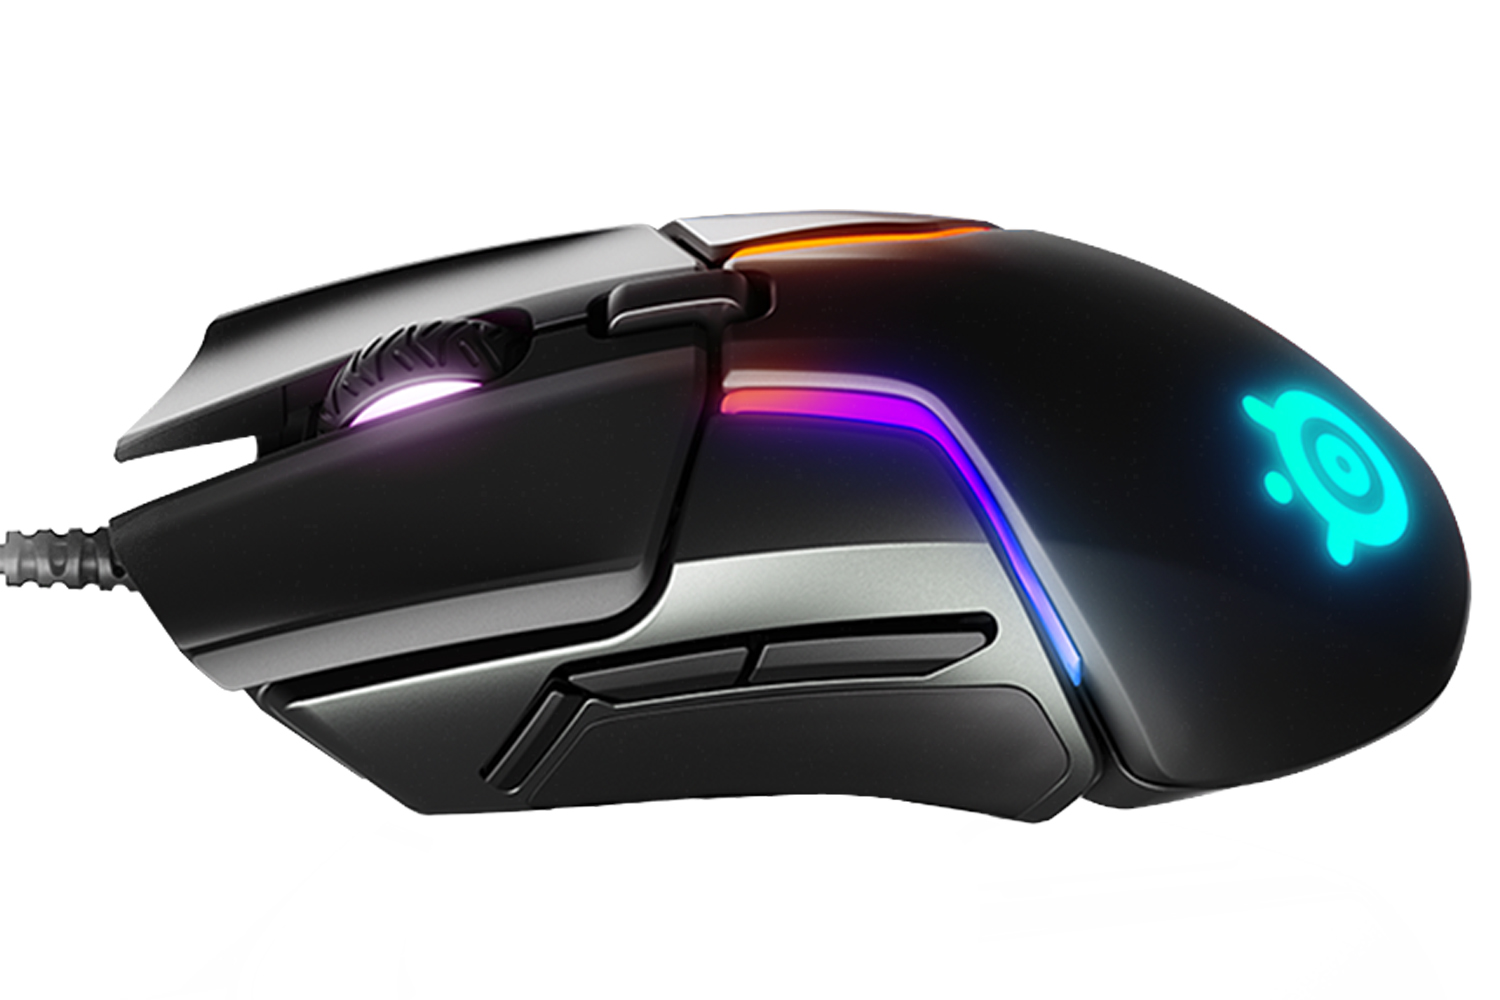 rival steelseries mouse